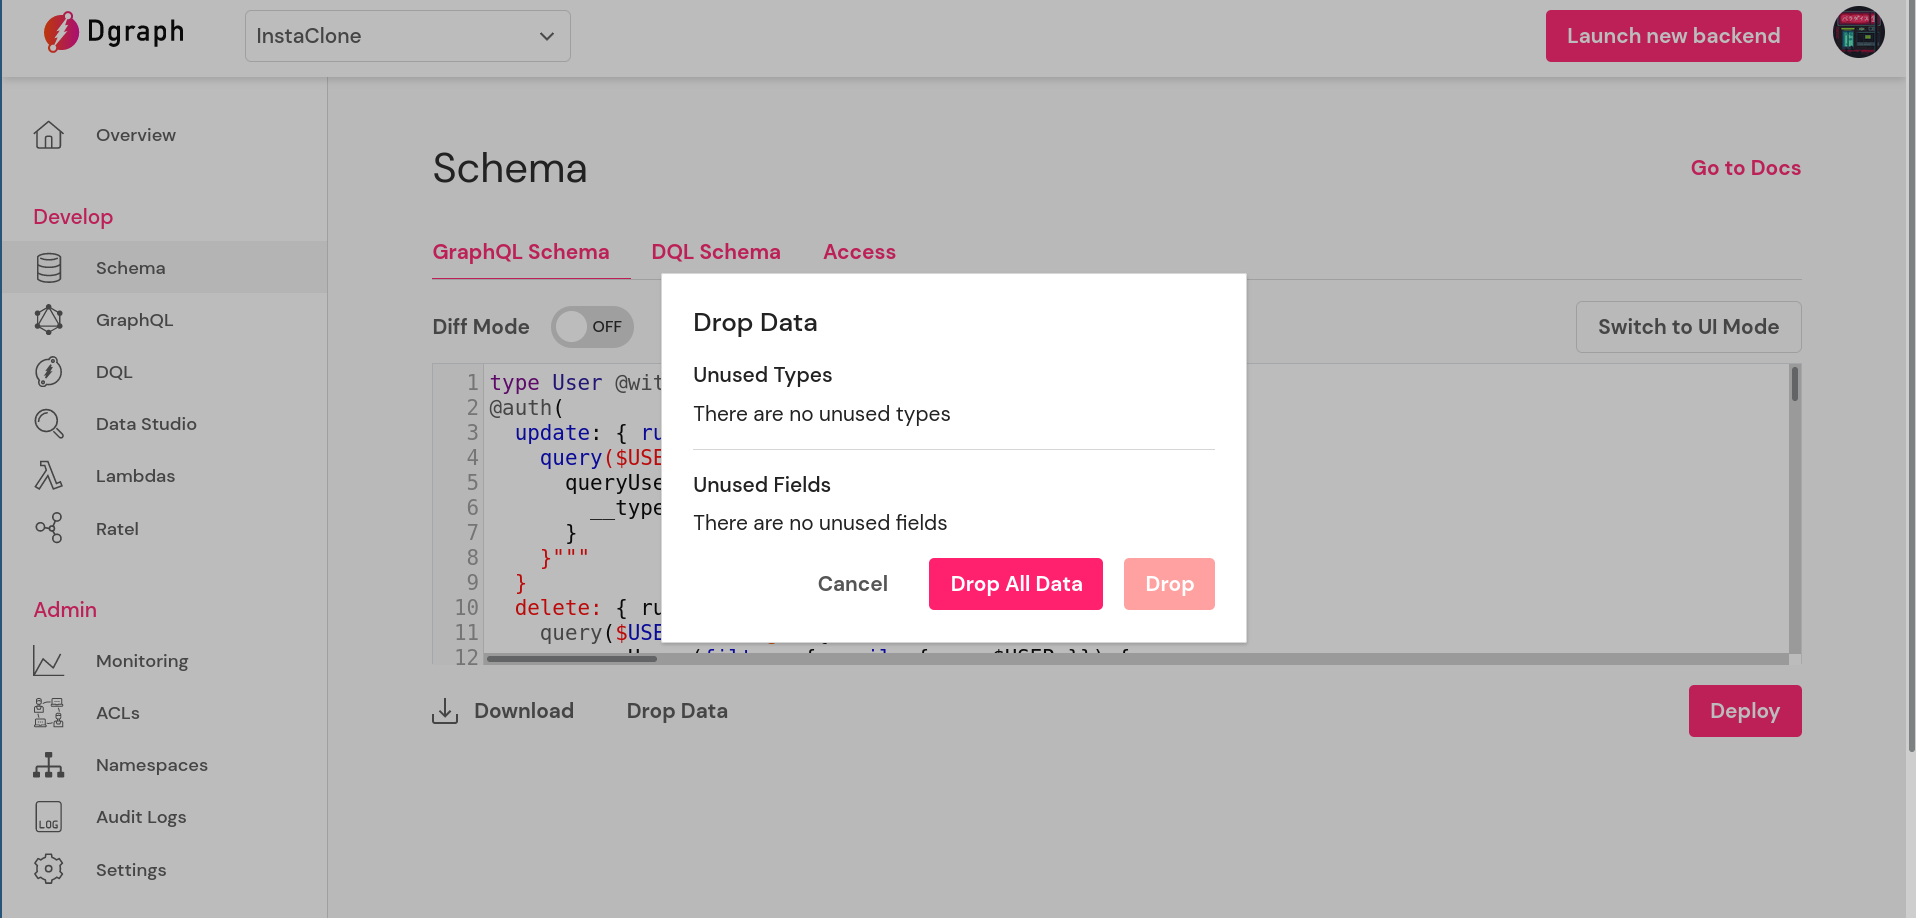 Selecting "Drop All Data" on the modal